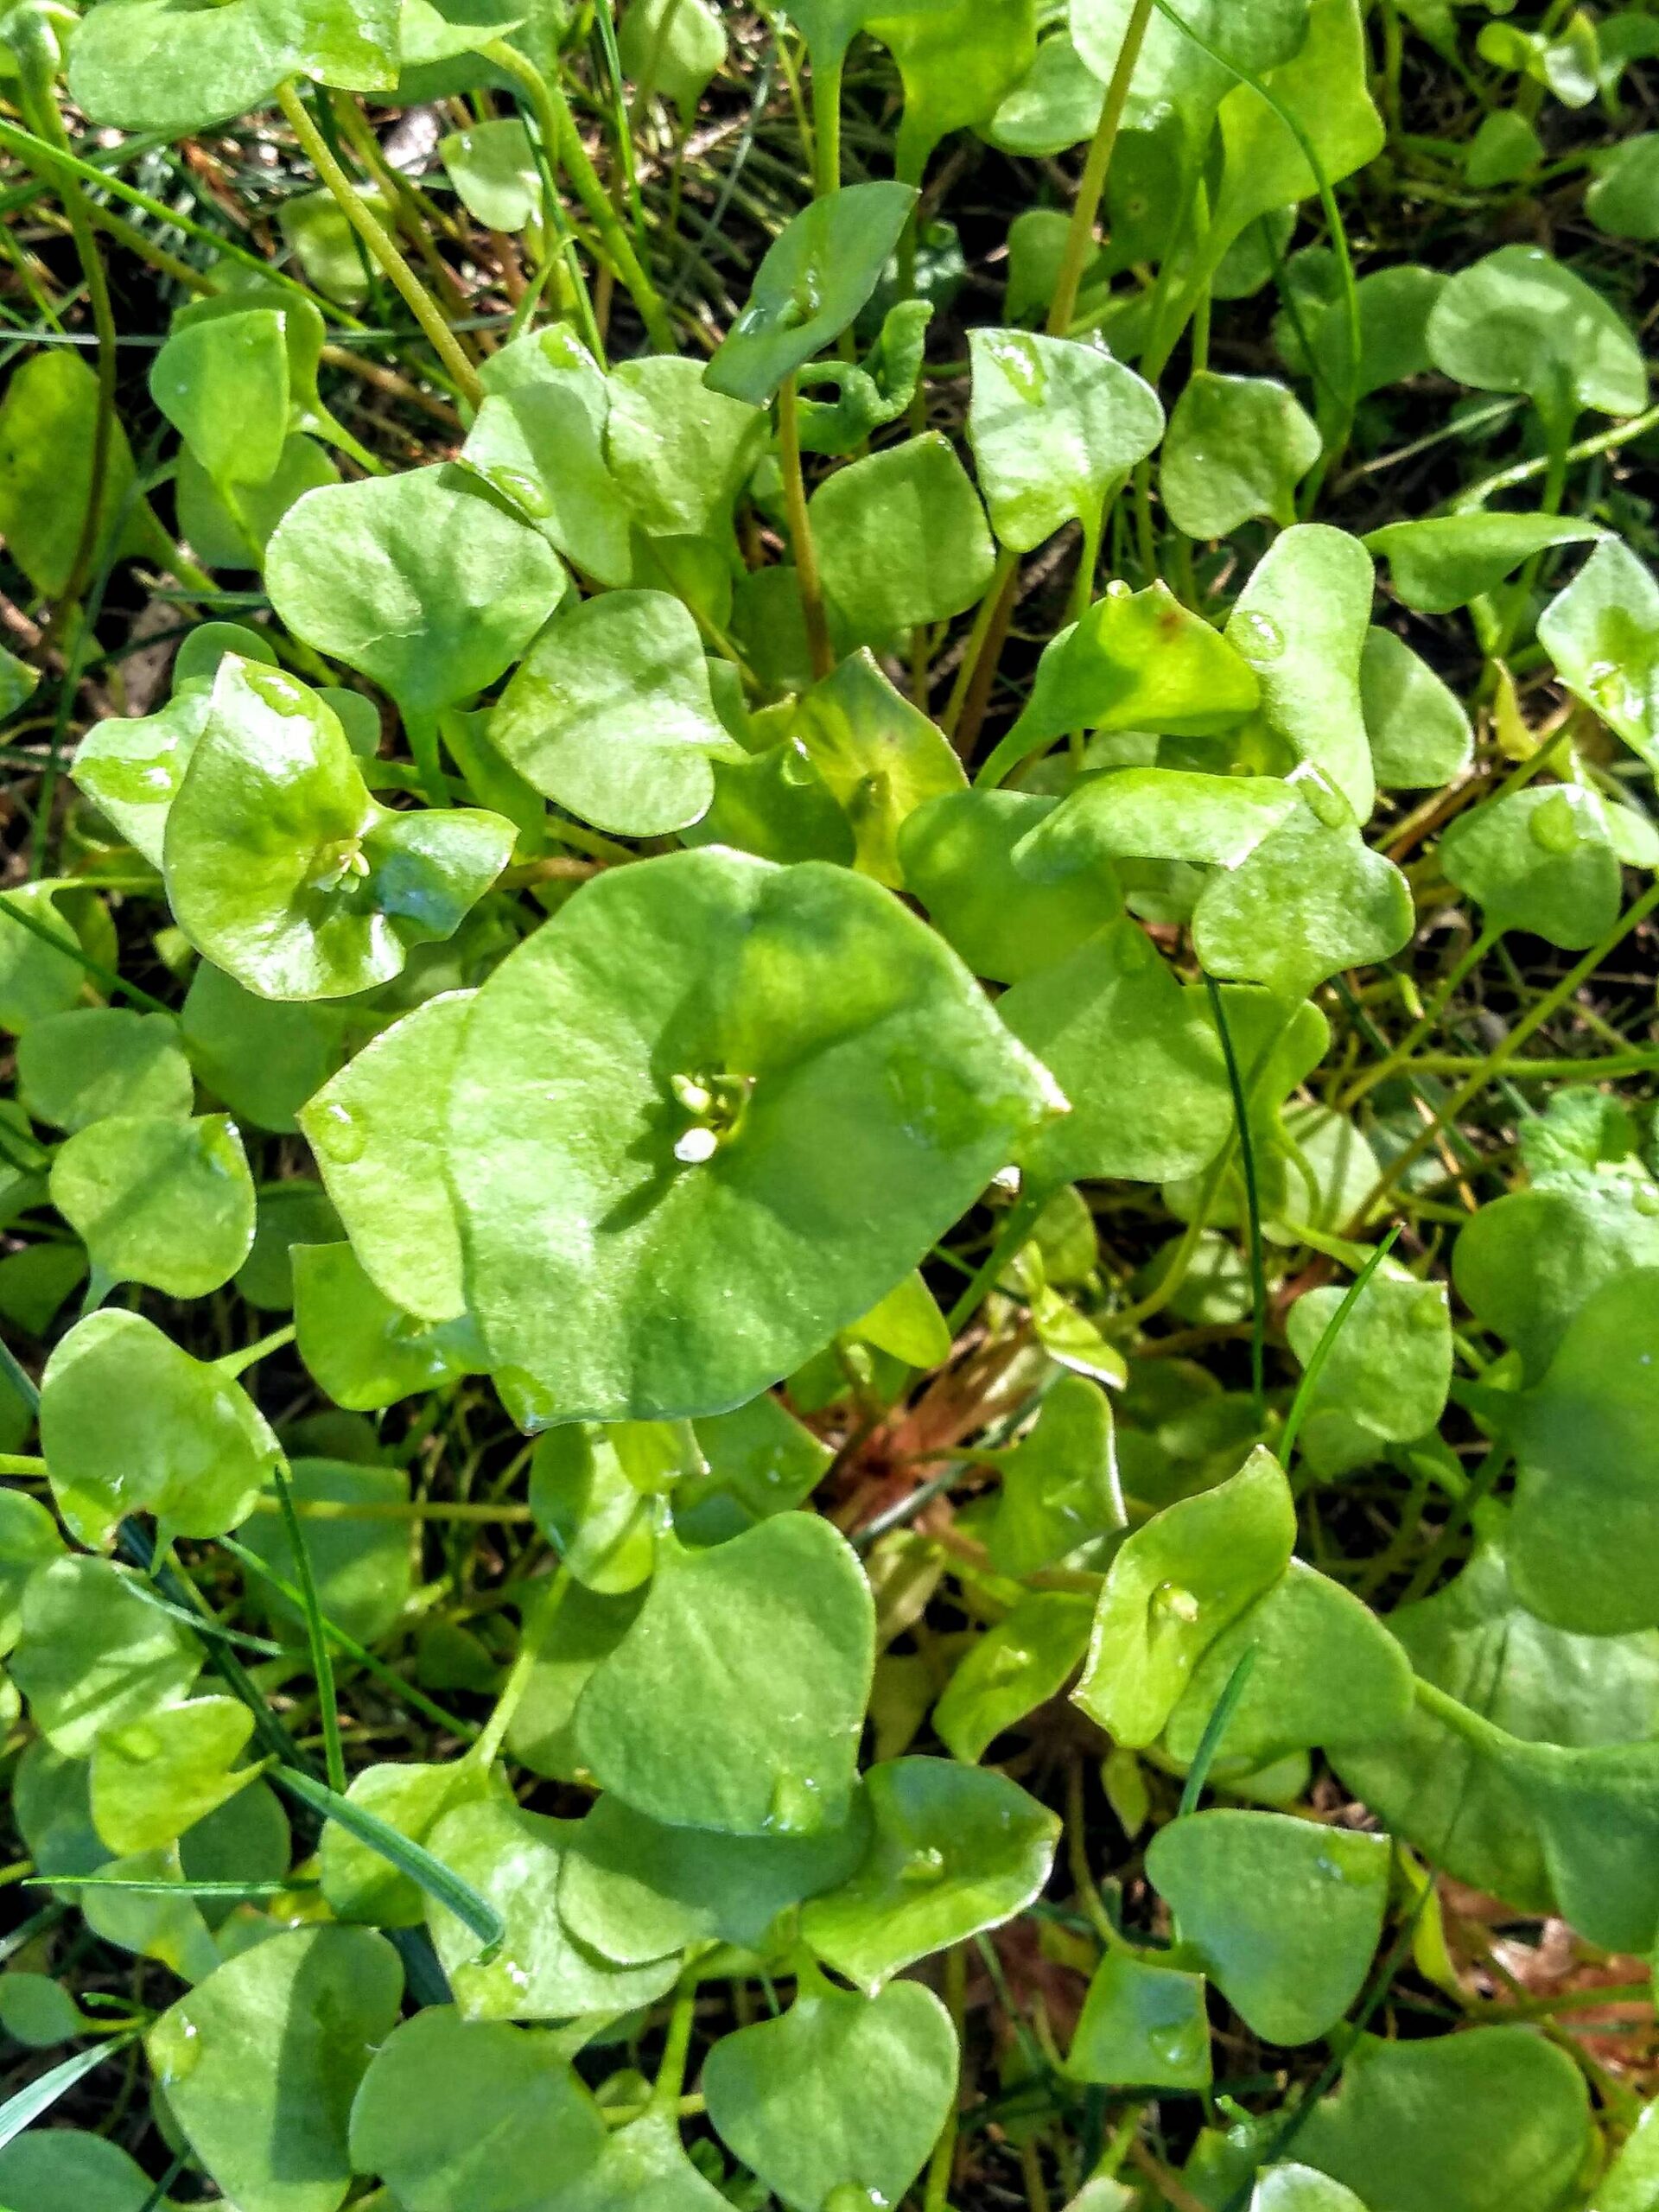 Claytonia perfoliata, also known as miner’s lettuce, is abundant on Whidbey and easily identifiable. (Photo provided)